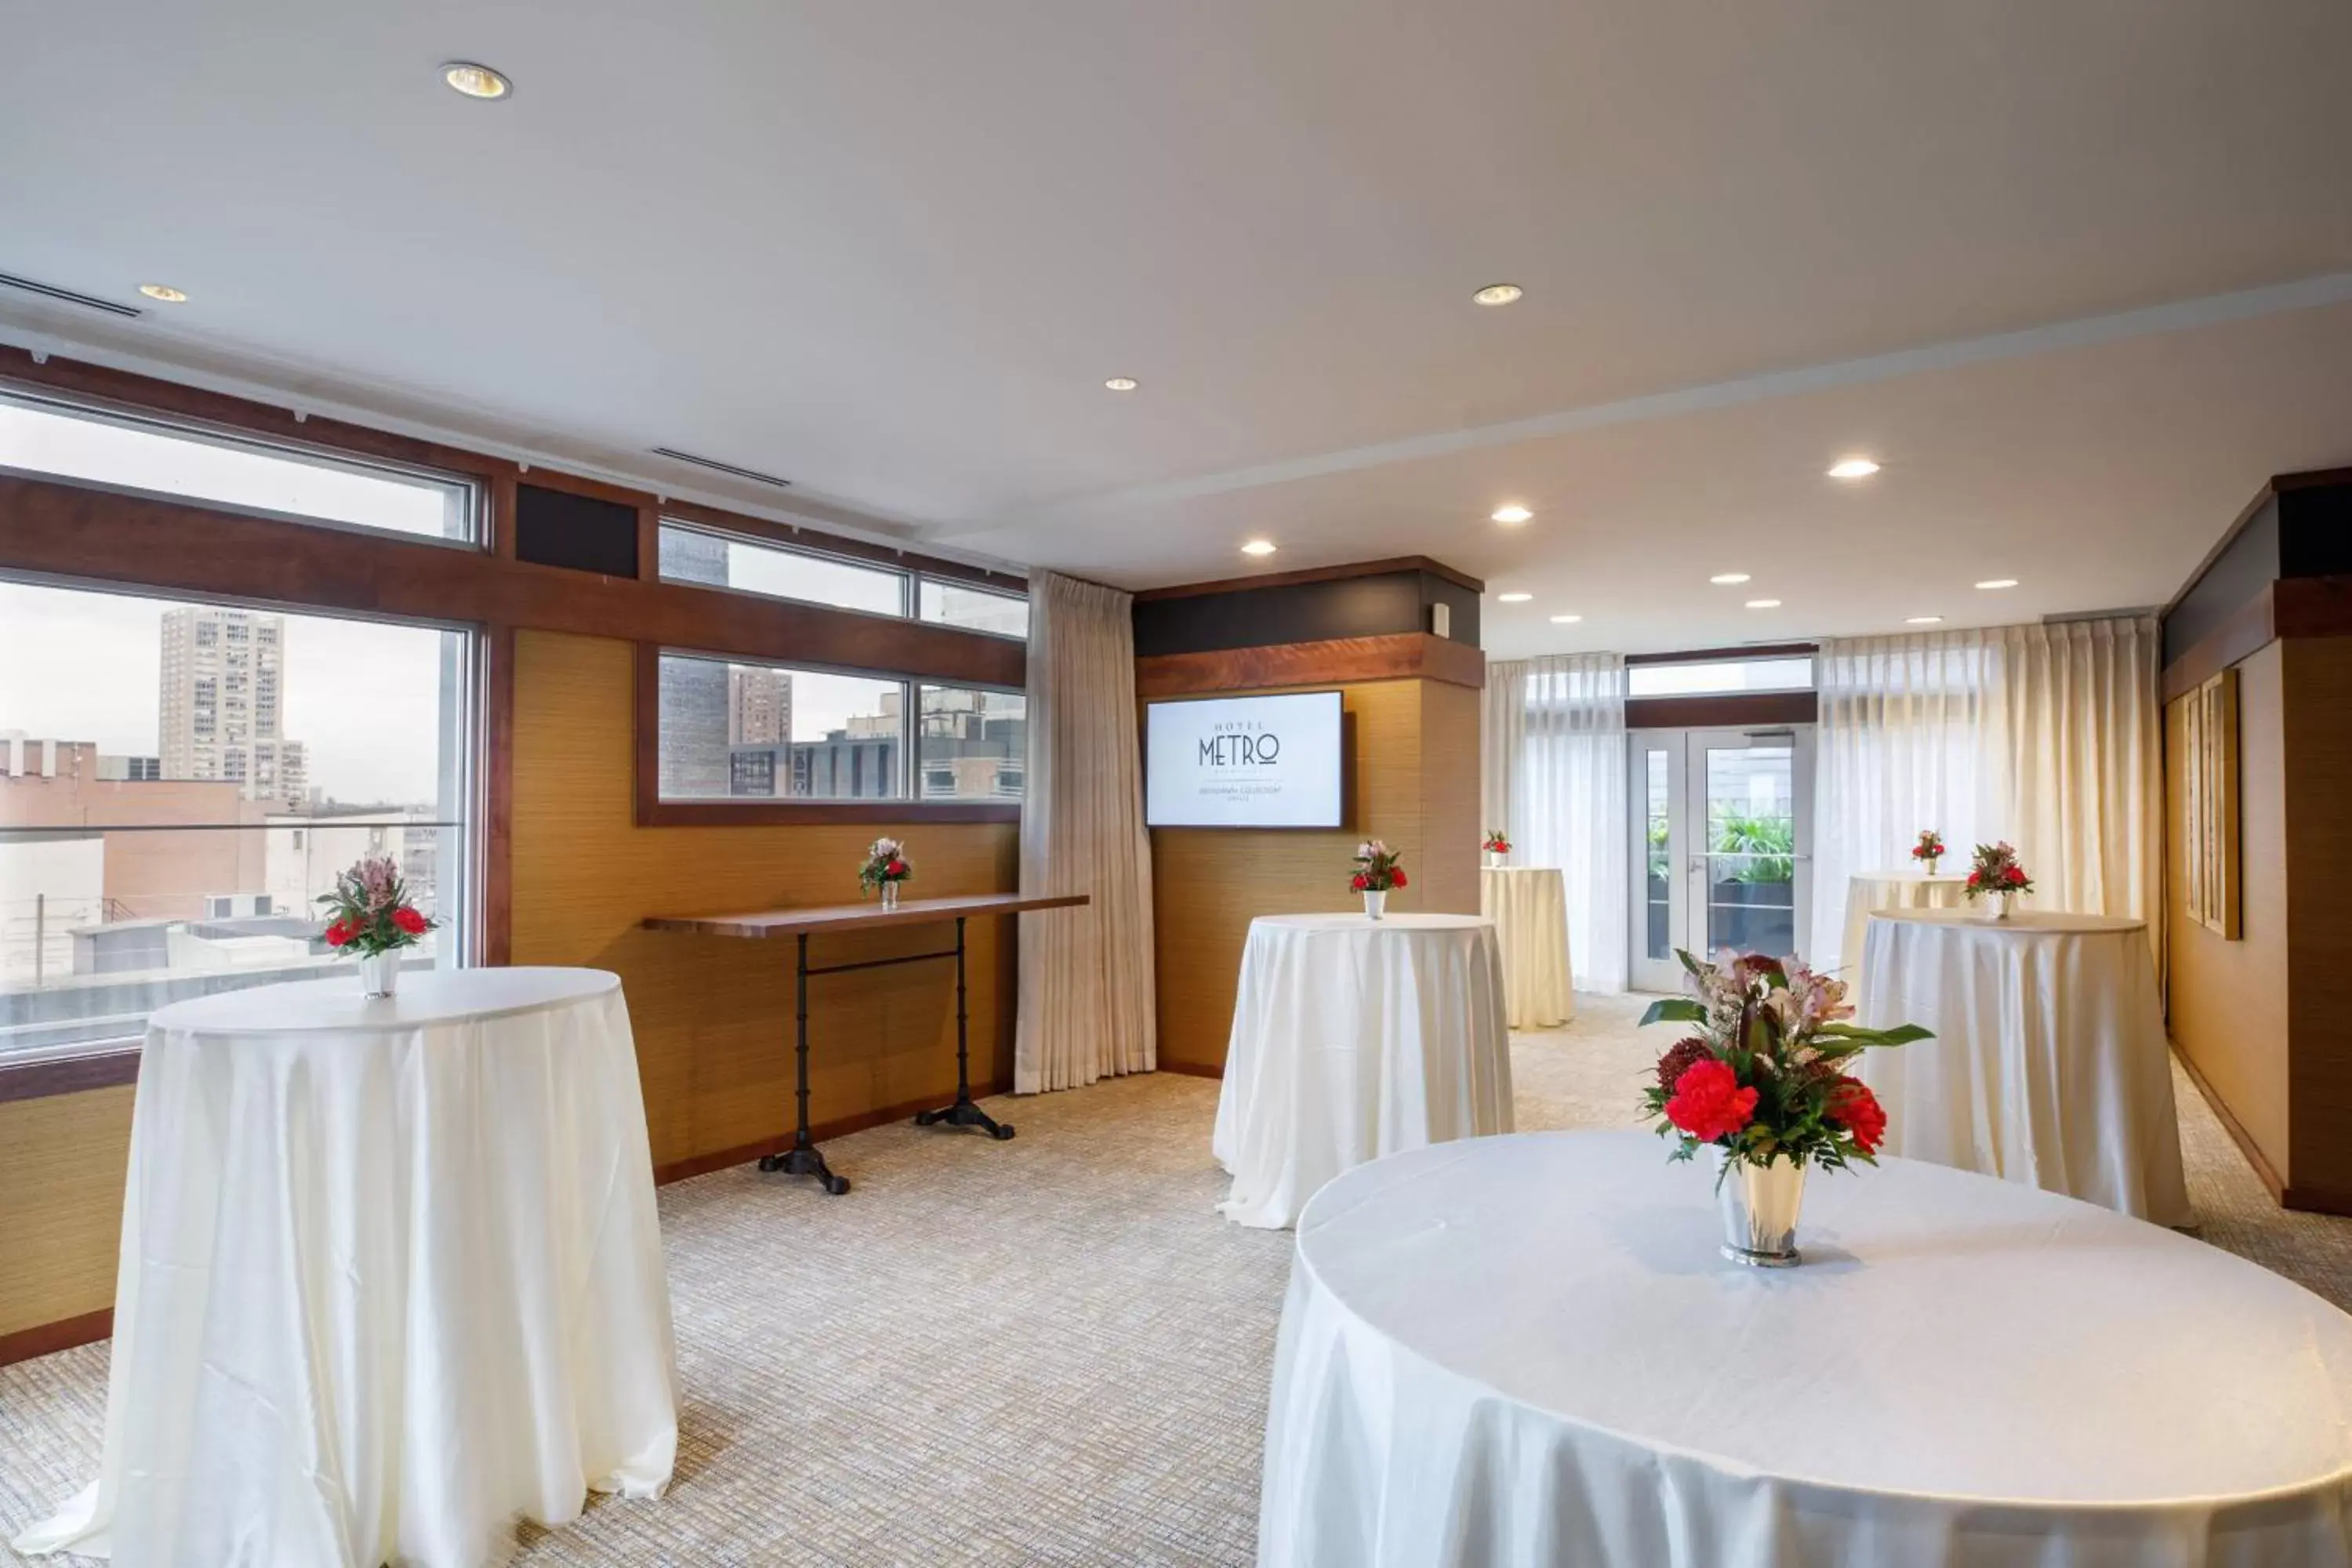 Meeting/conference room, Banquet Facilities in Hotel Metro, Autograph Collection